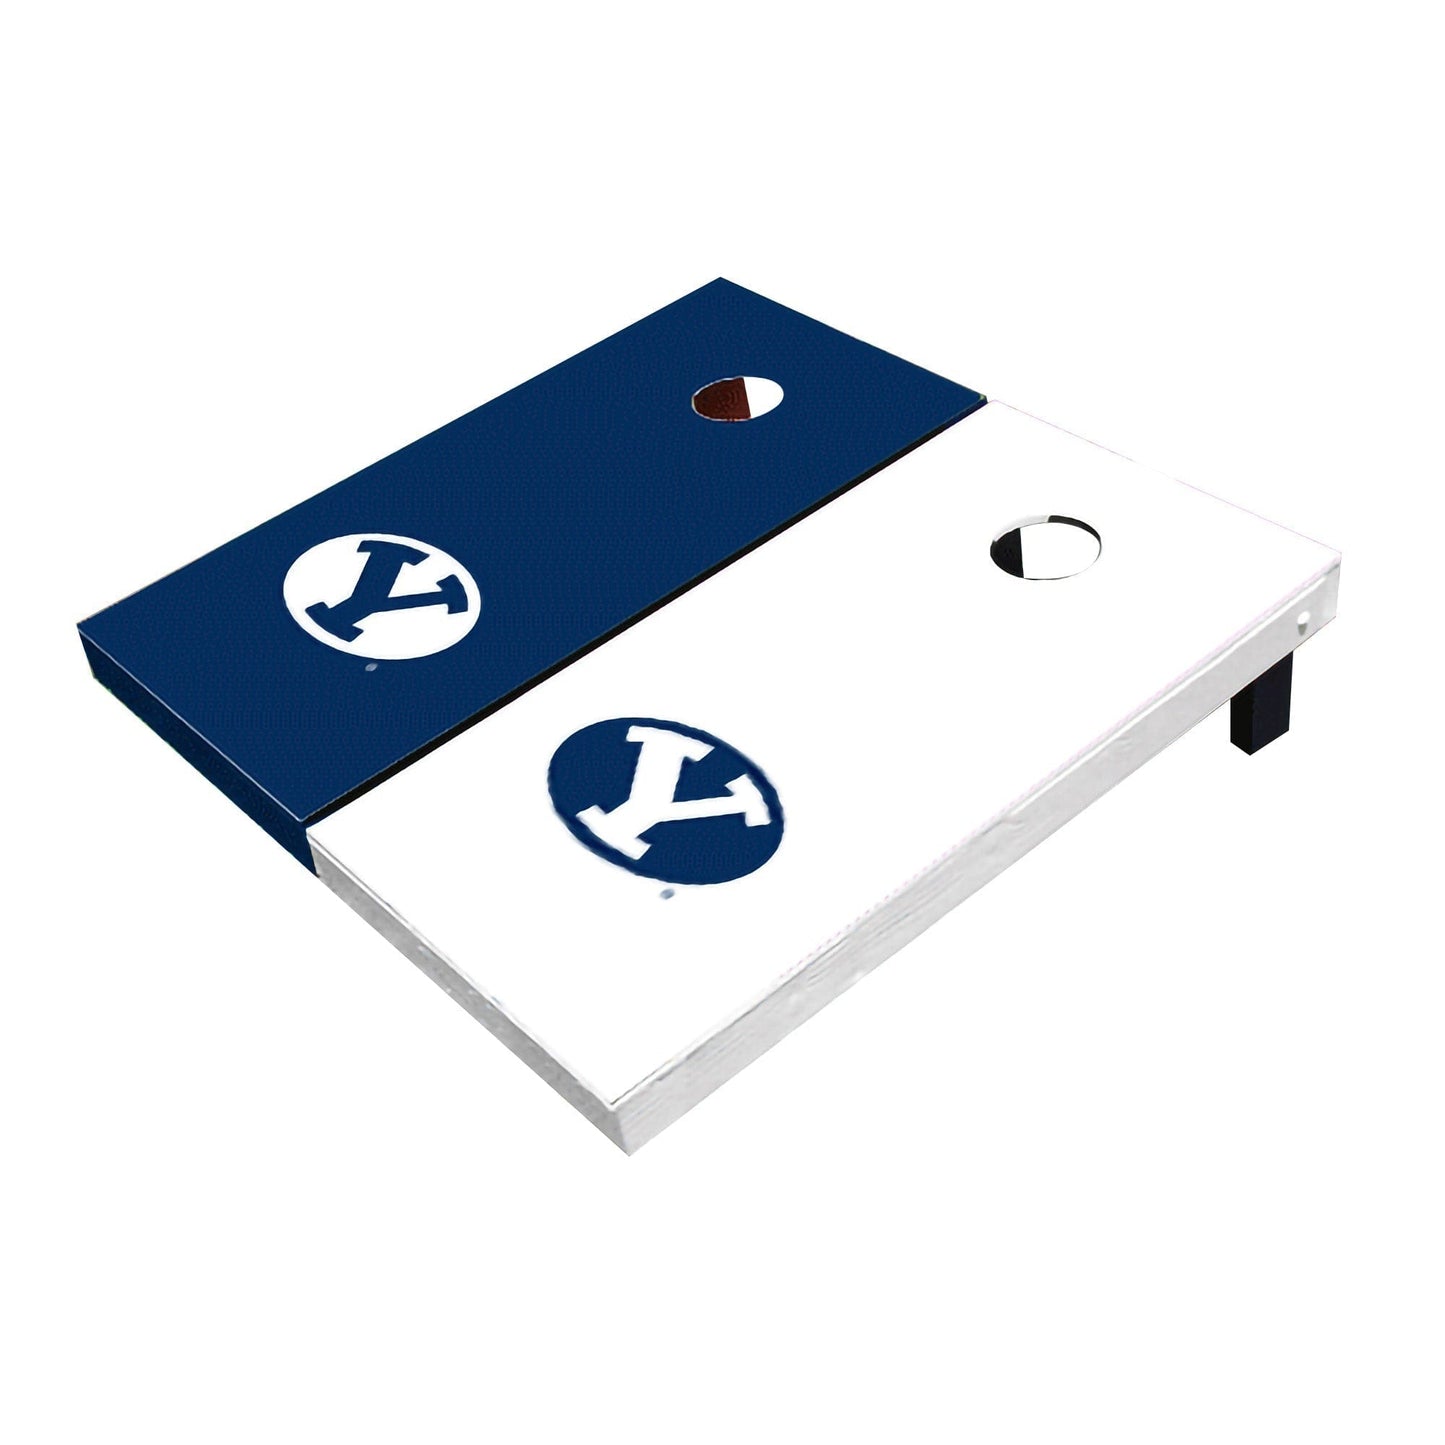 Brigham Young BYU Cougars Alternating Solid All-Weather Cornhole Boards